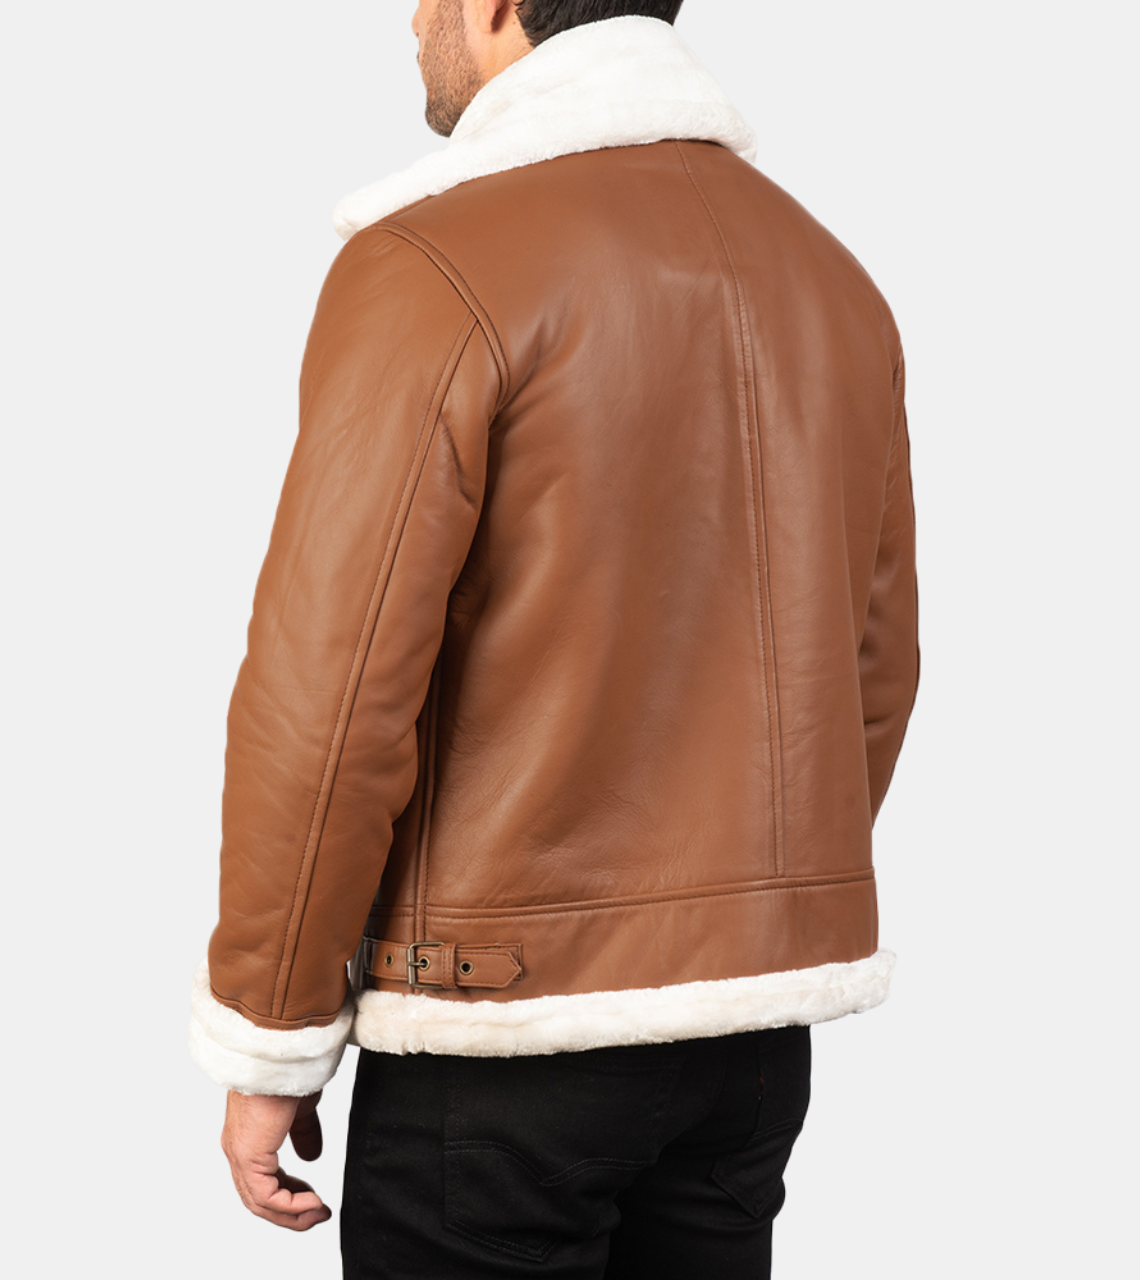 Alarie Men's Brown Shearling Leather Jacket Back